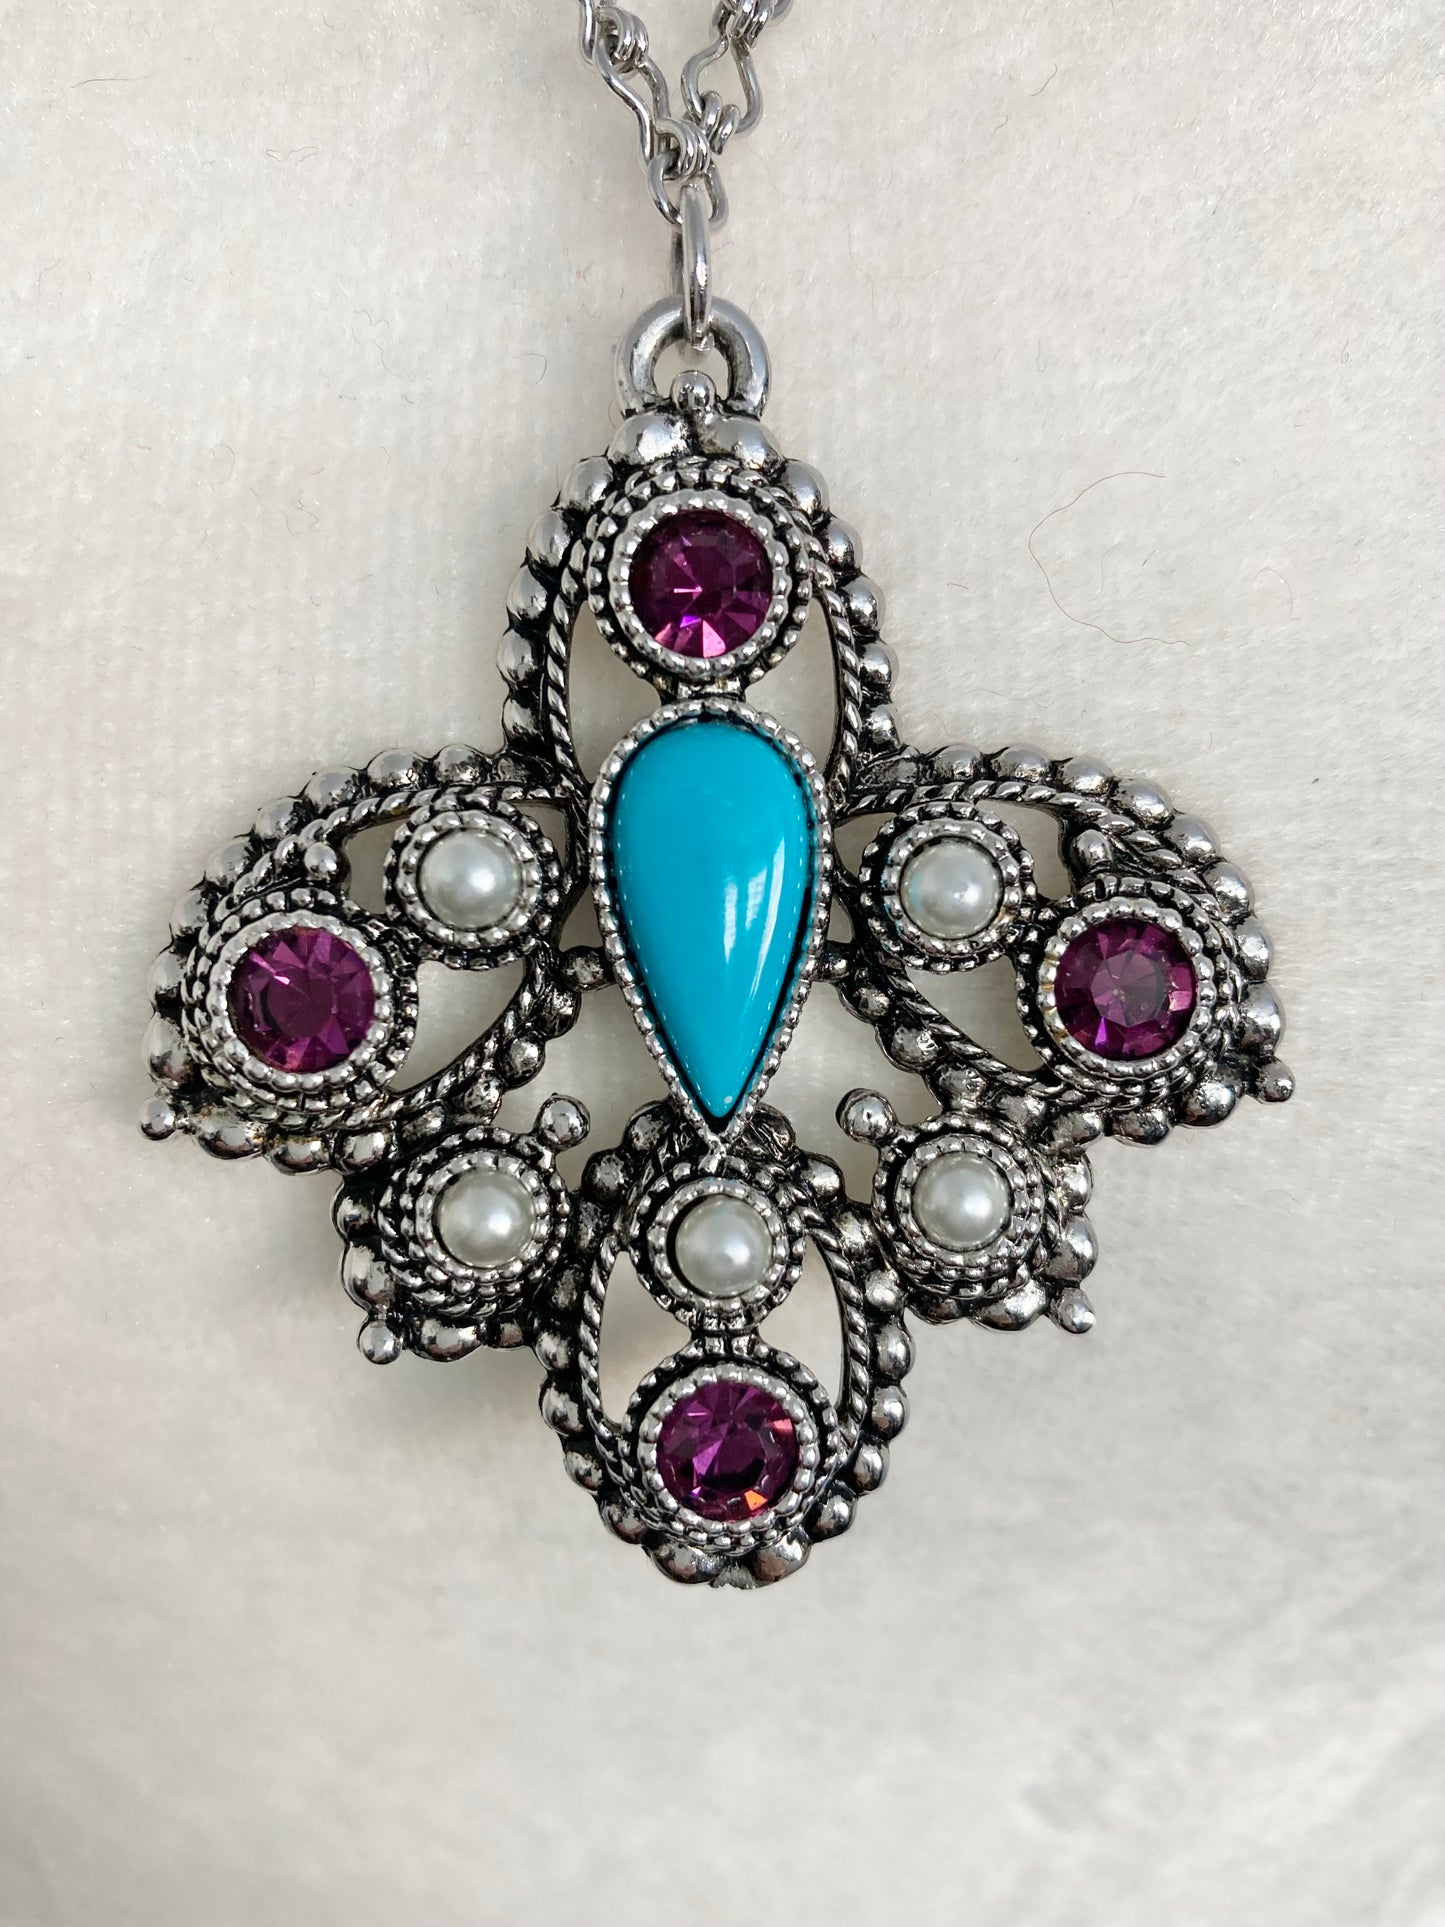 Vintage Sarah Coventry Turquoise, Amethyst and Pearl Pendant Necklace